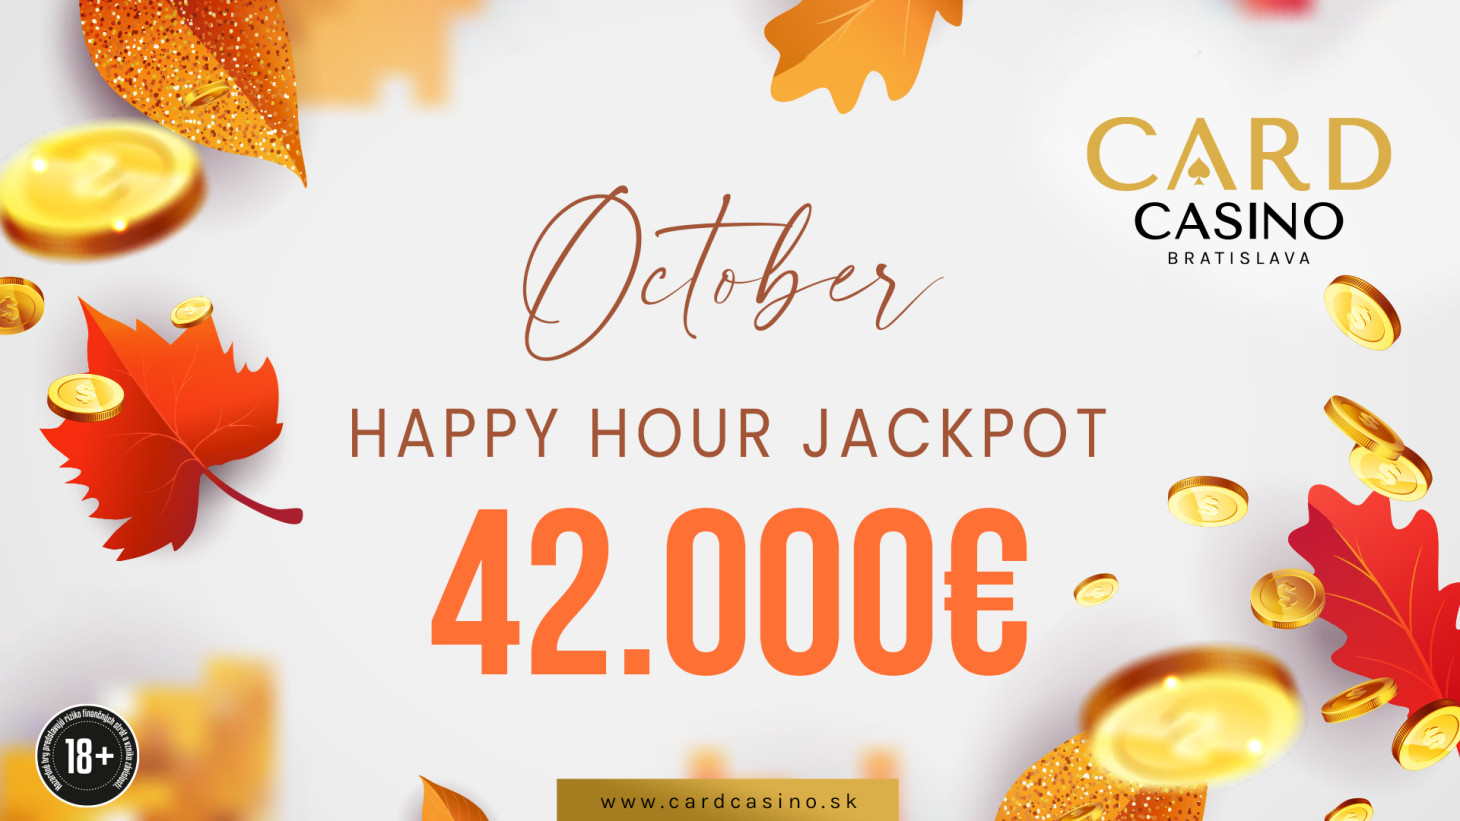 October Jackpots are full of cash. The casino will give away €42,000!